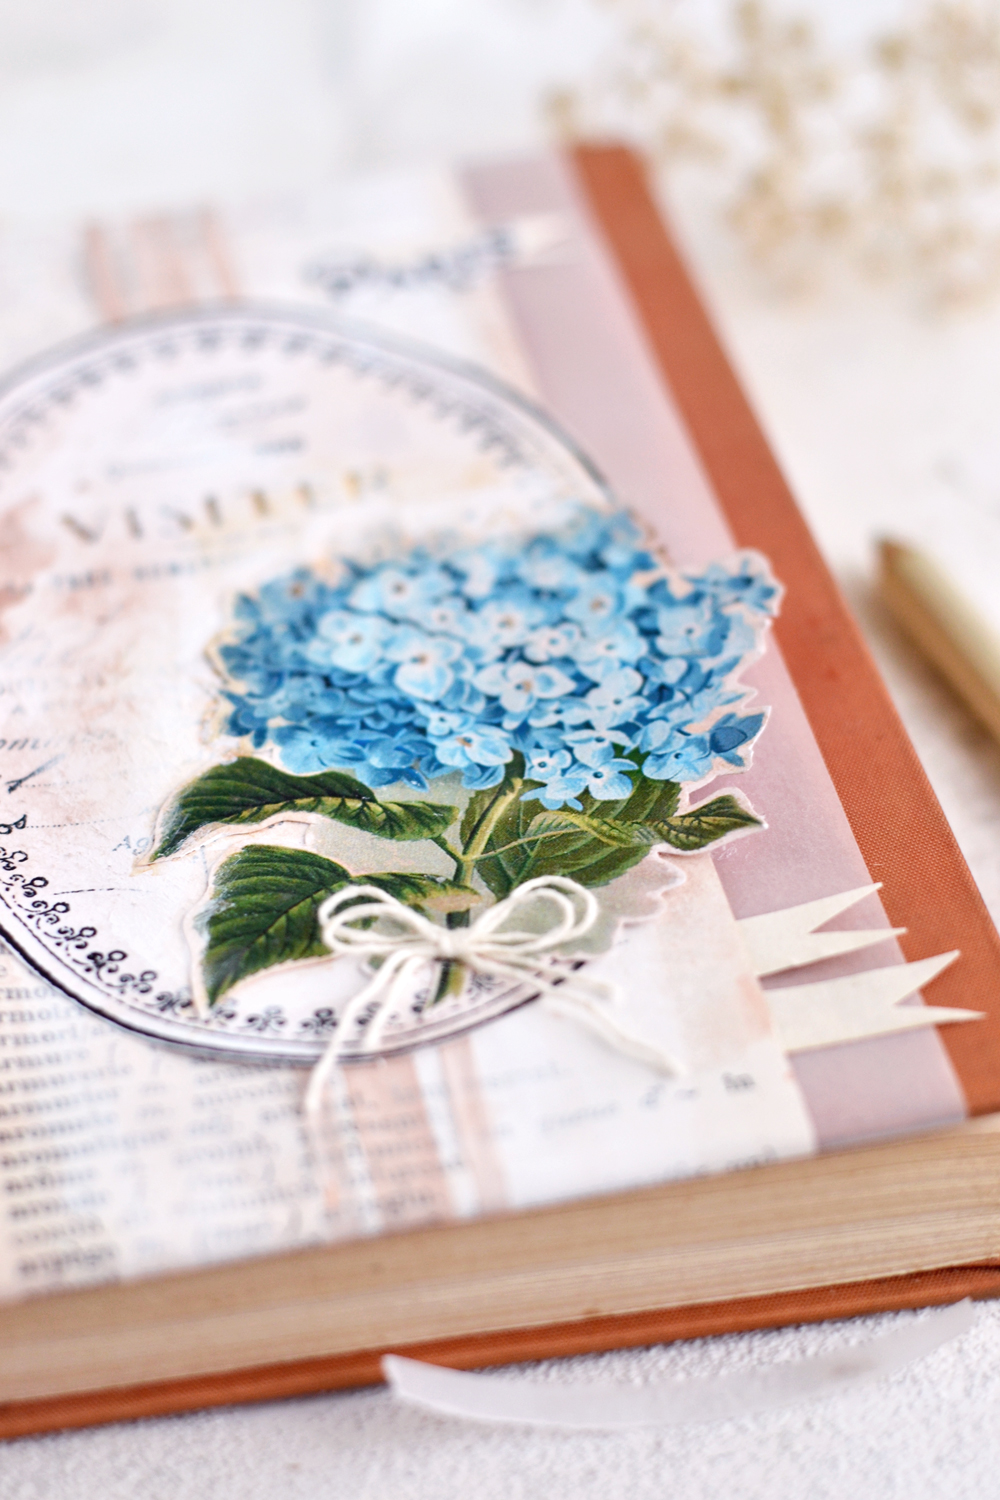 DIY Vintage French Art Journal Cover - learn how to easily make this DIY project using supplies that you might have around and an old dictionary! #DIY #vintage #freeprintable #hydrangea #artjournal #junkjournal 